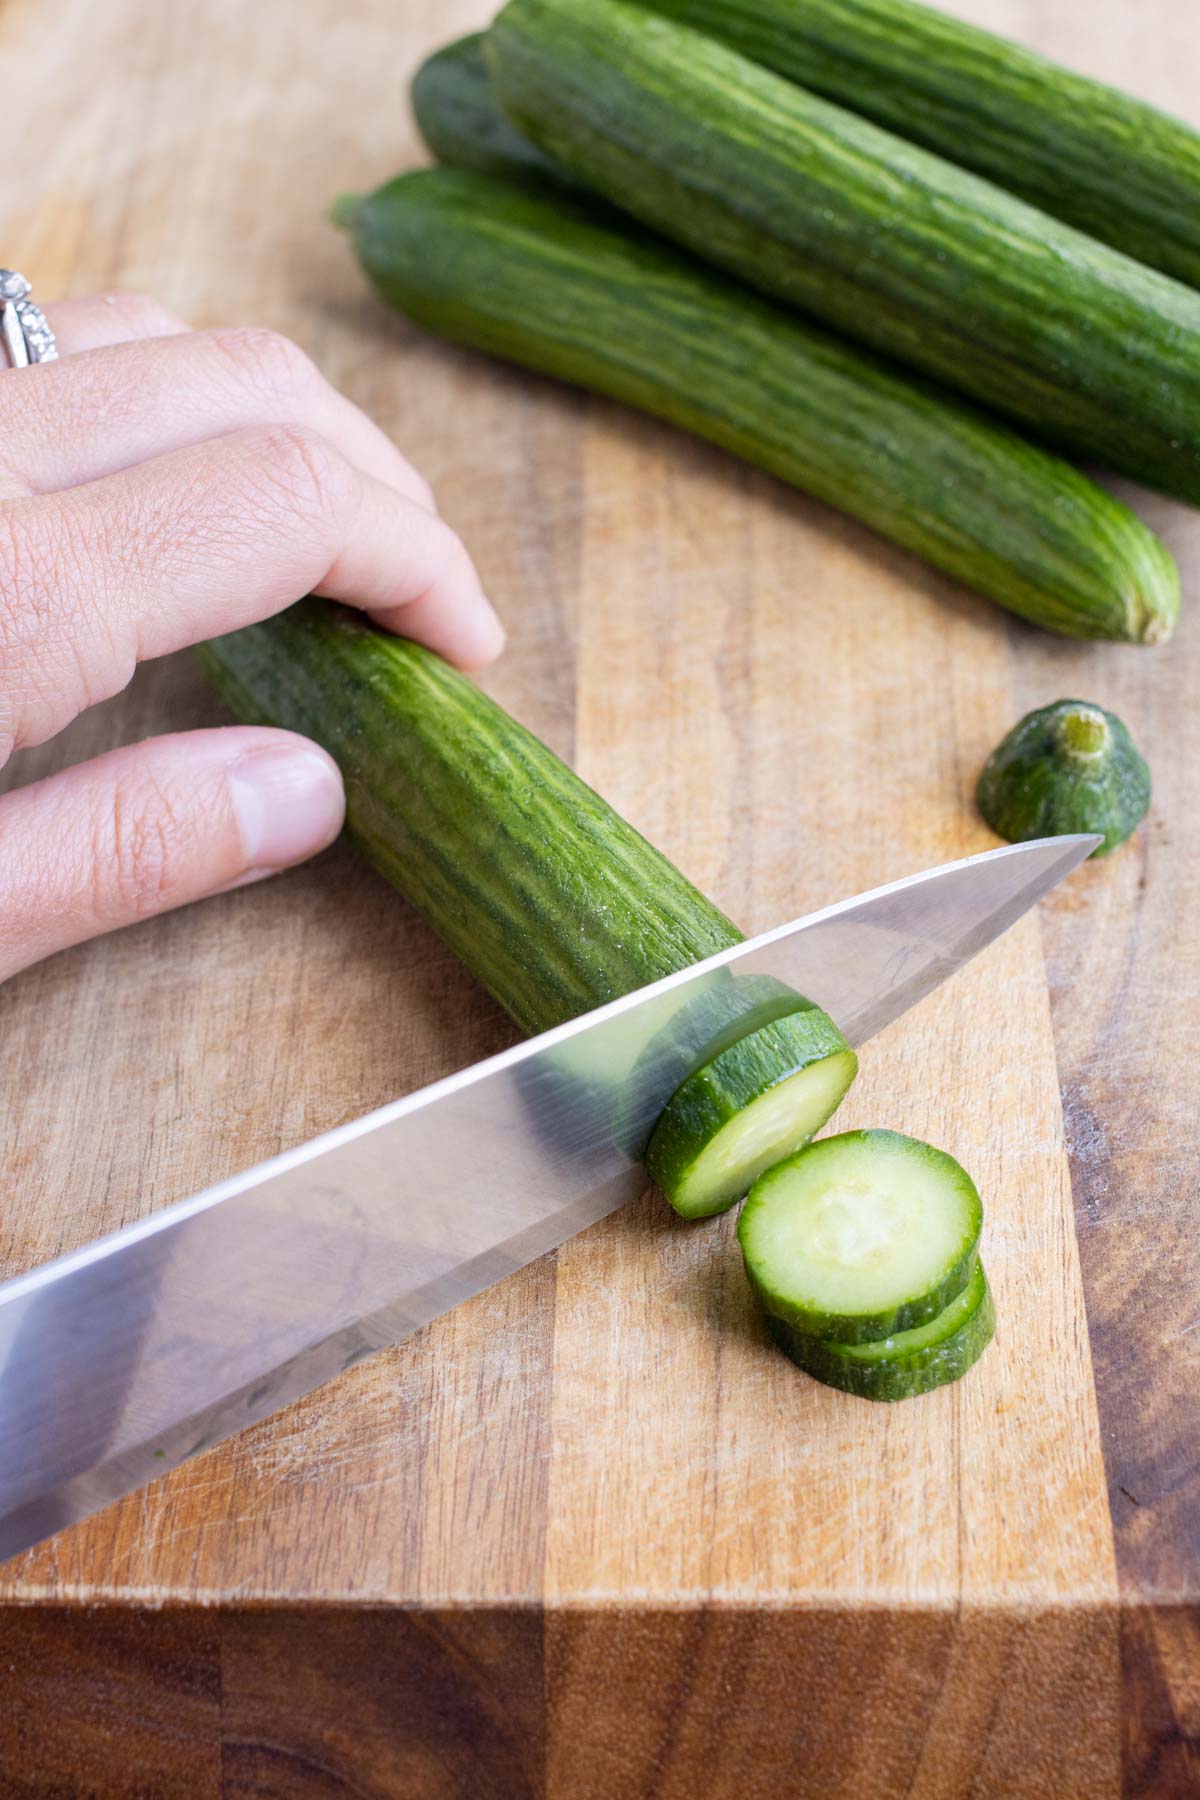 A cucumber is sliced into ¼ inch thick slices on a wooden cutting board.